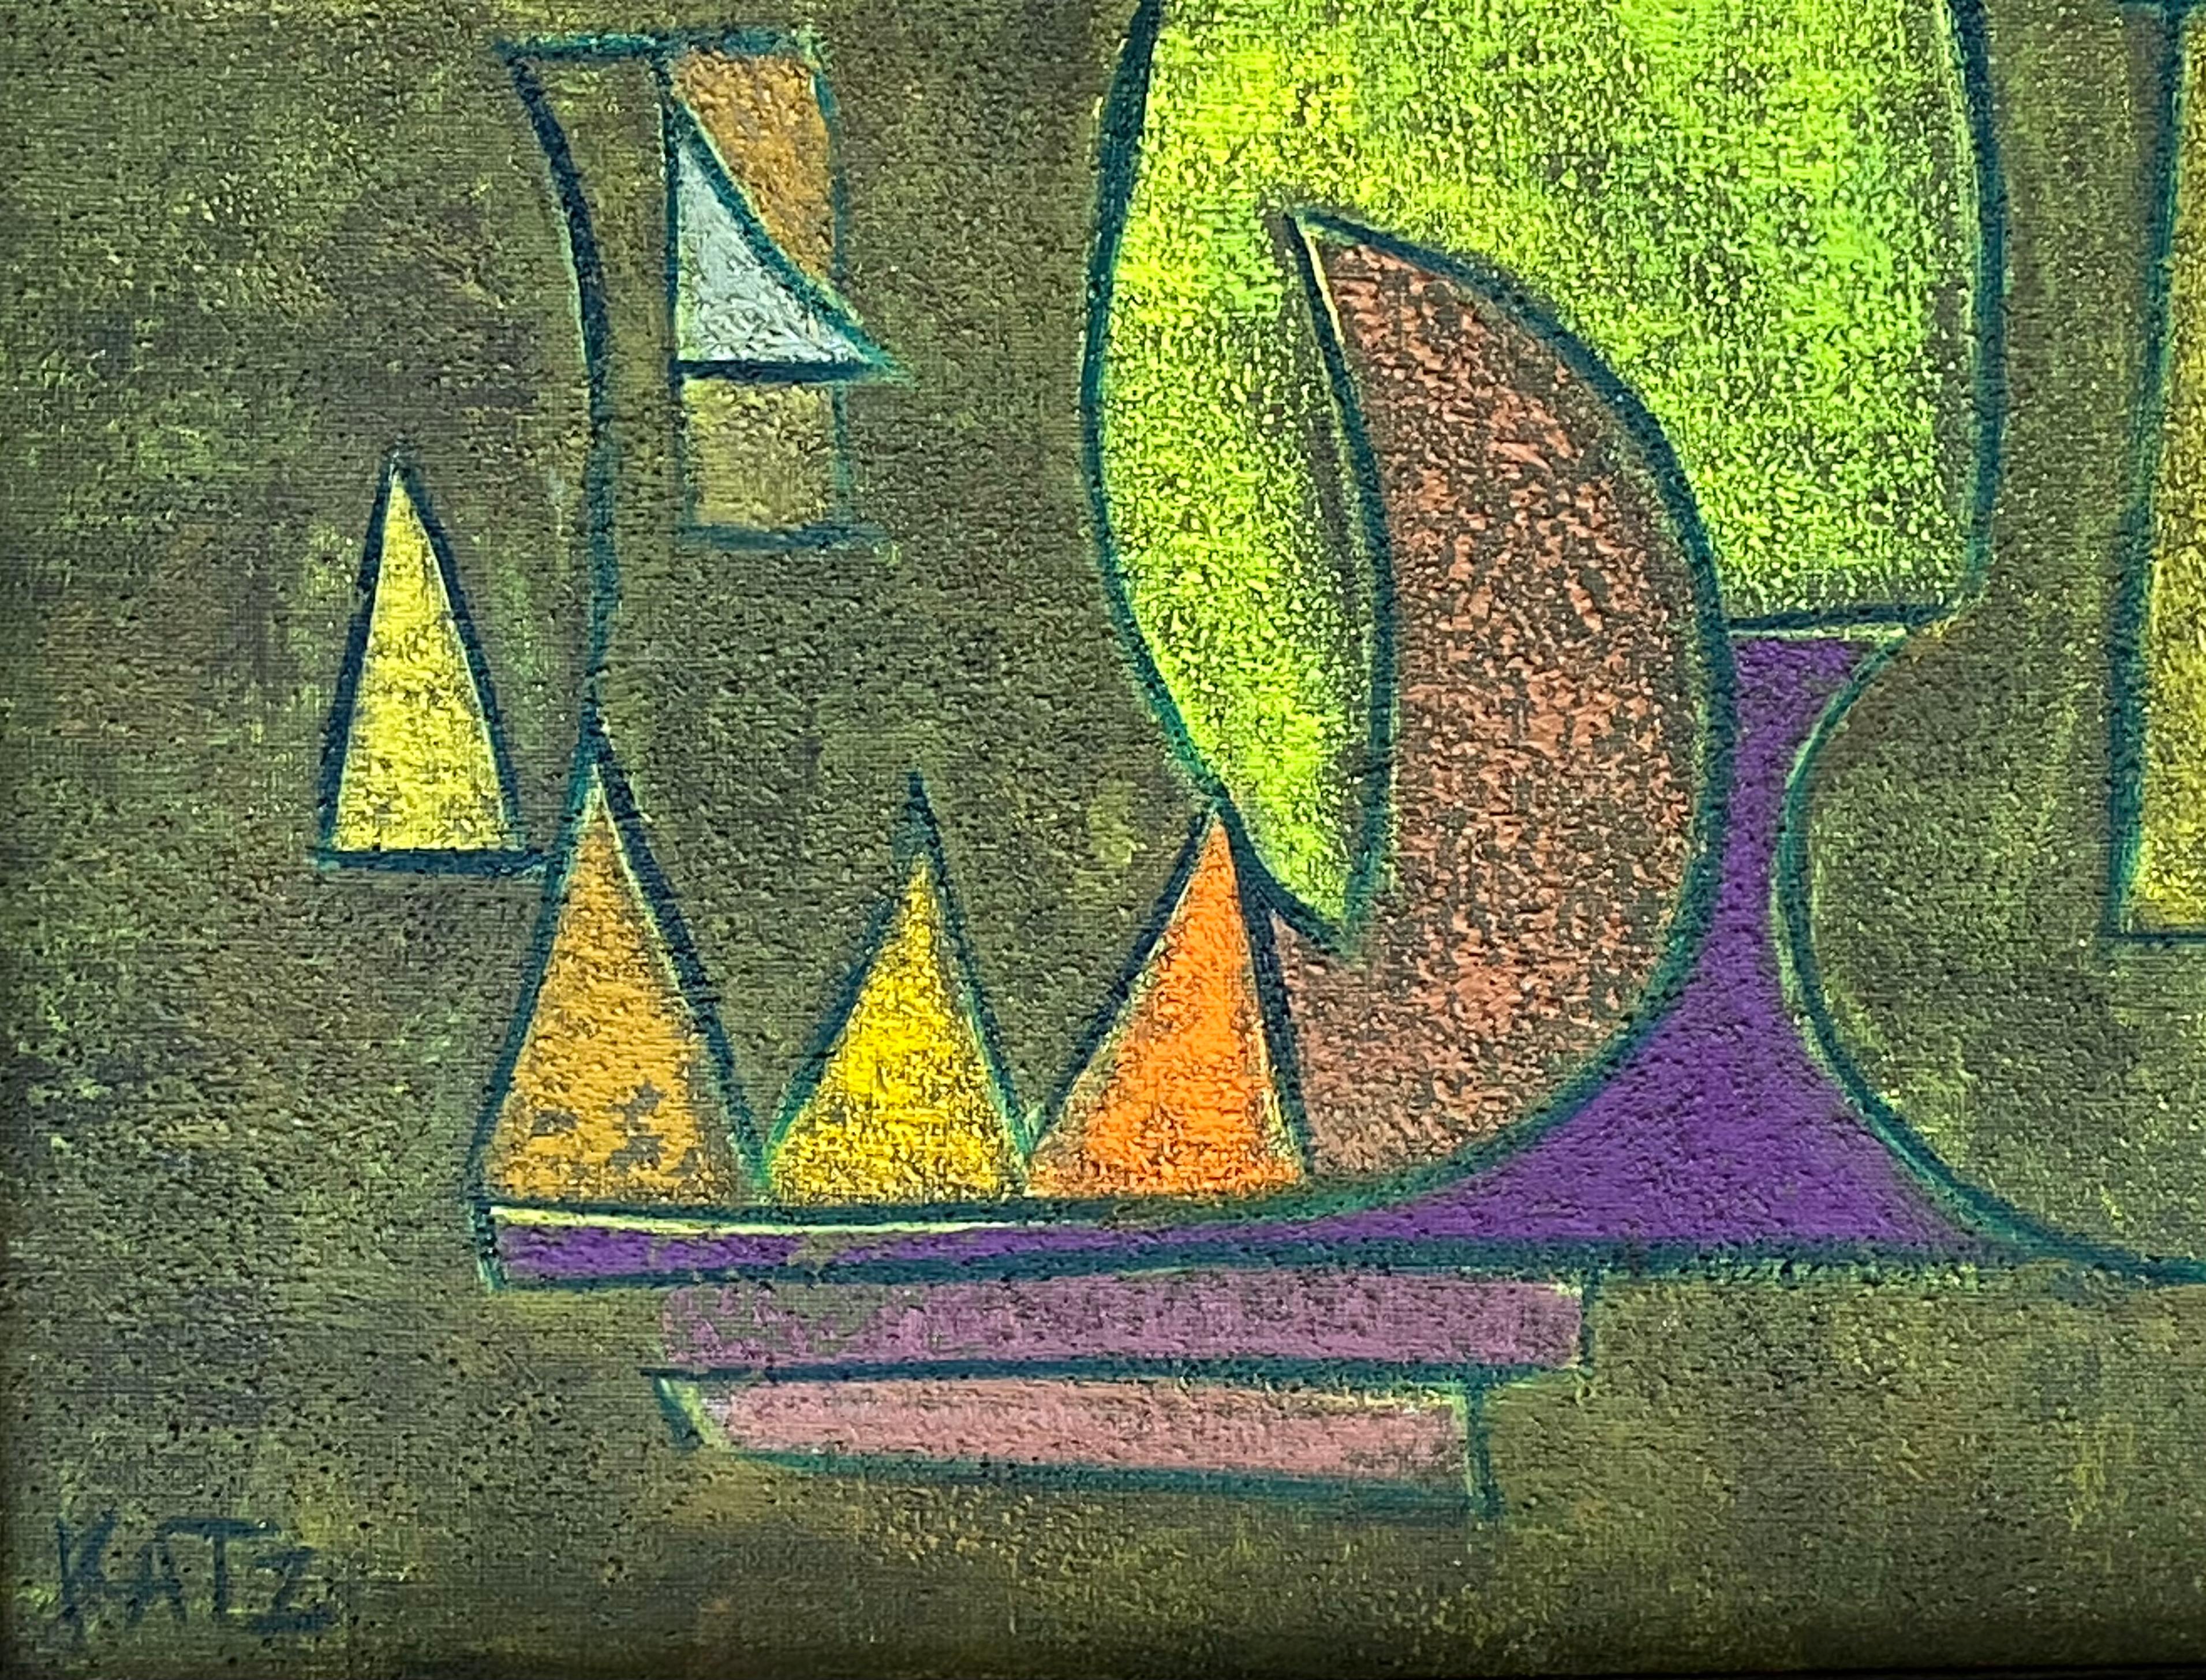 Fabulous original mid century modern oil on canvas painting by the well known New York artist, William Katz.  The painting is done in a colorful abstraction of sailboats and is signed by the artist lower left.  The artist has mixed sand into the oil